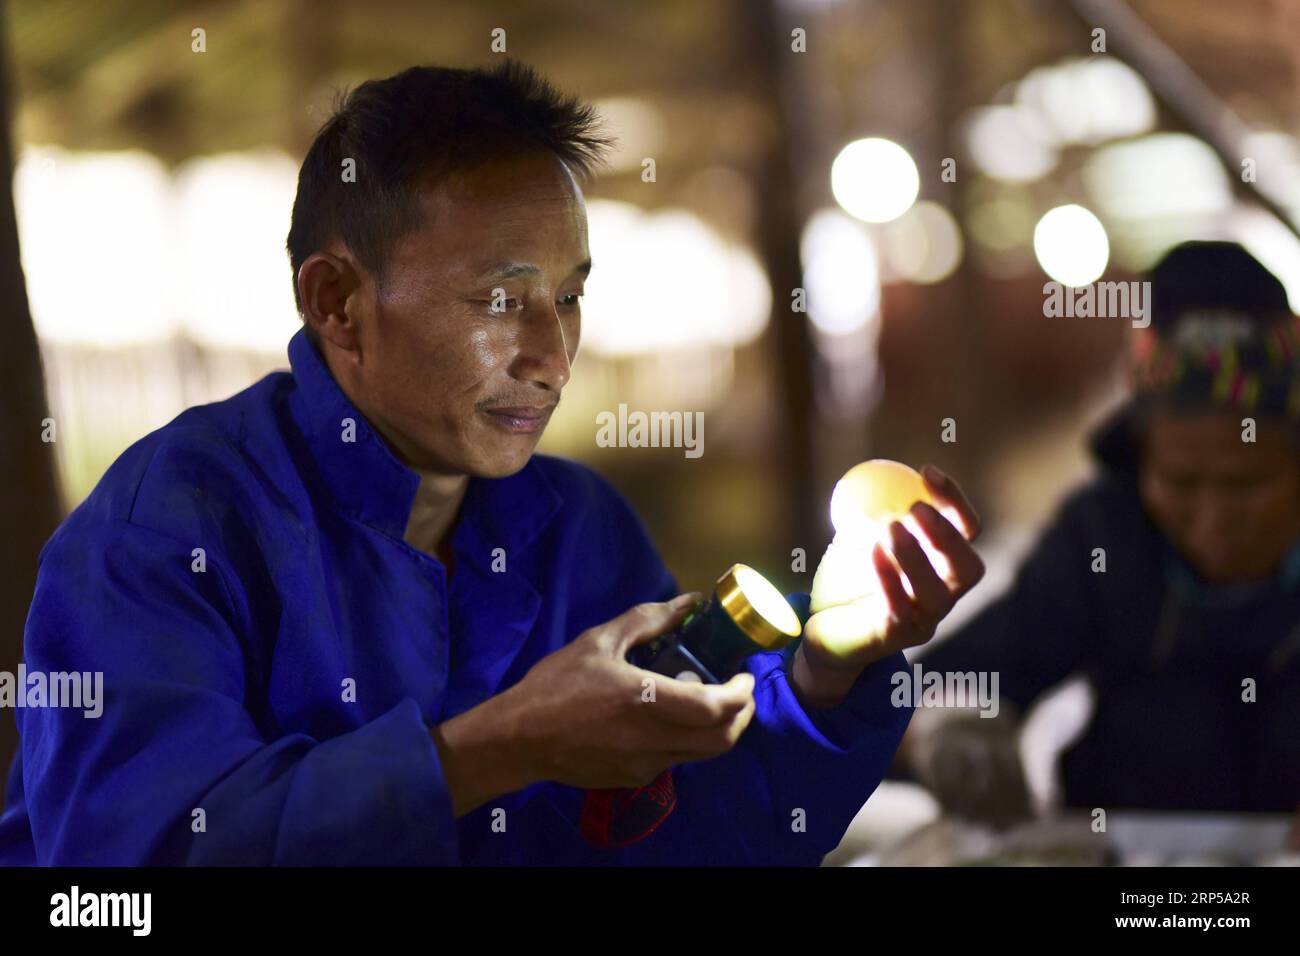 (181205) -- DANZHAI, Dec. 5, 2018 (Xinhua) -- Yang Zaiheng checks the quality of a duck egg at an egg-laying duck farm in Dingdong Village of Danzhai County, Qiandongnan Miao and Dong Autonomous Prefecture, southwest China s Guizhou Province, Dec. 4, 2018. Duck farmer Yang Zaiheng, 42, was once impoverished. After getting rid of poverty in 2015 through livestock and fish farming, Yang decided to promote the breeding industry in local area and help other impoverished households increase income. In 2017, Yang and other six households set up an egg-laying duck breeding cooperative with a duck egg Stock Photo